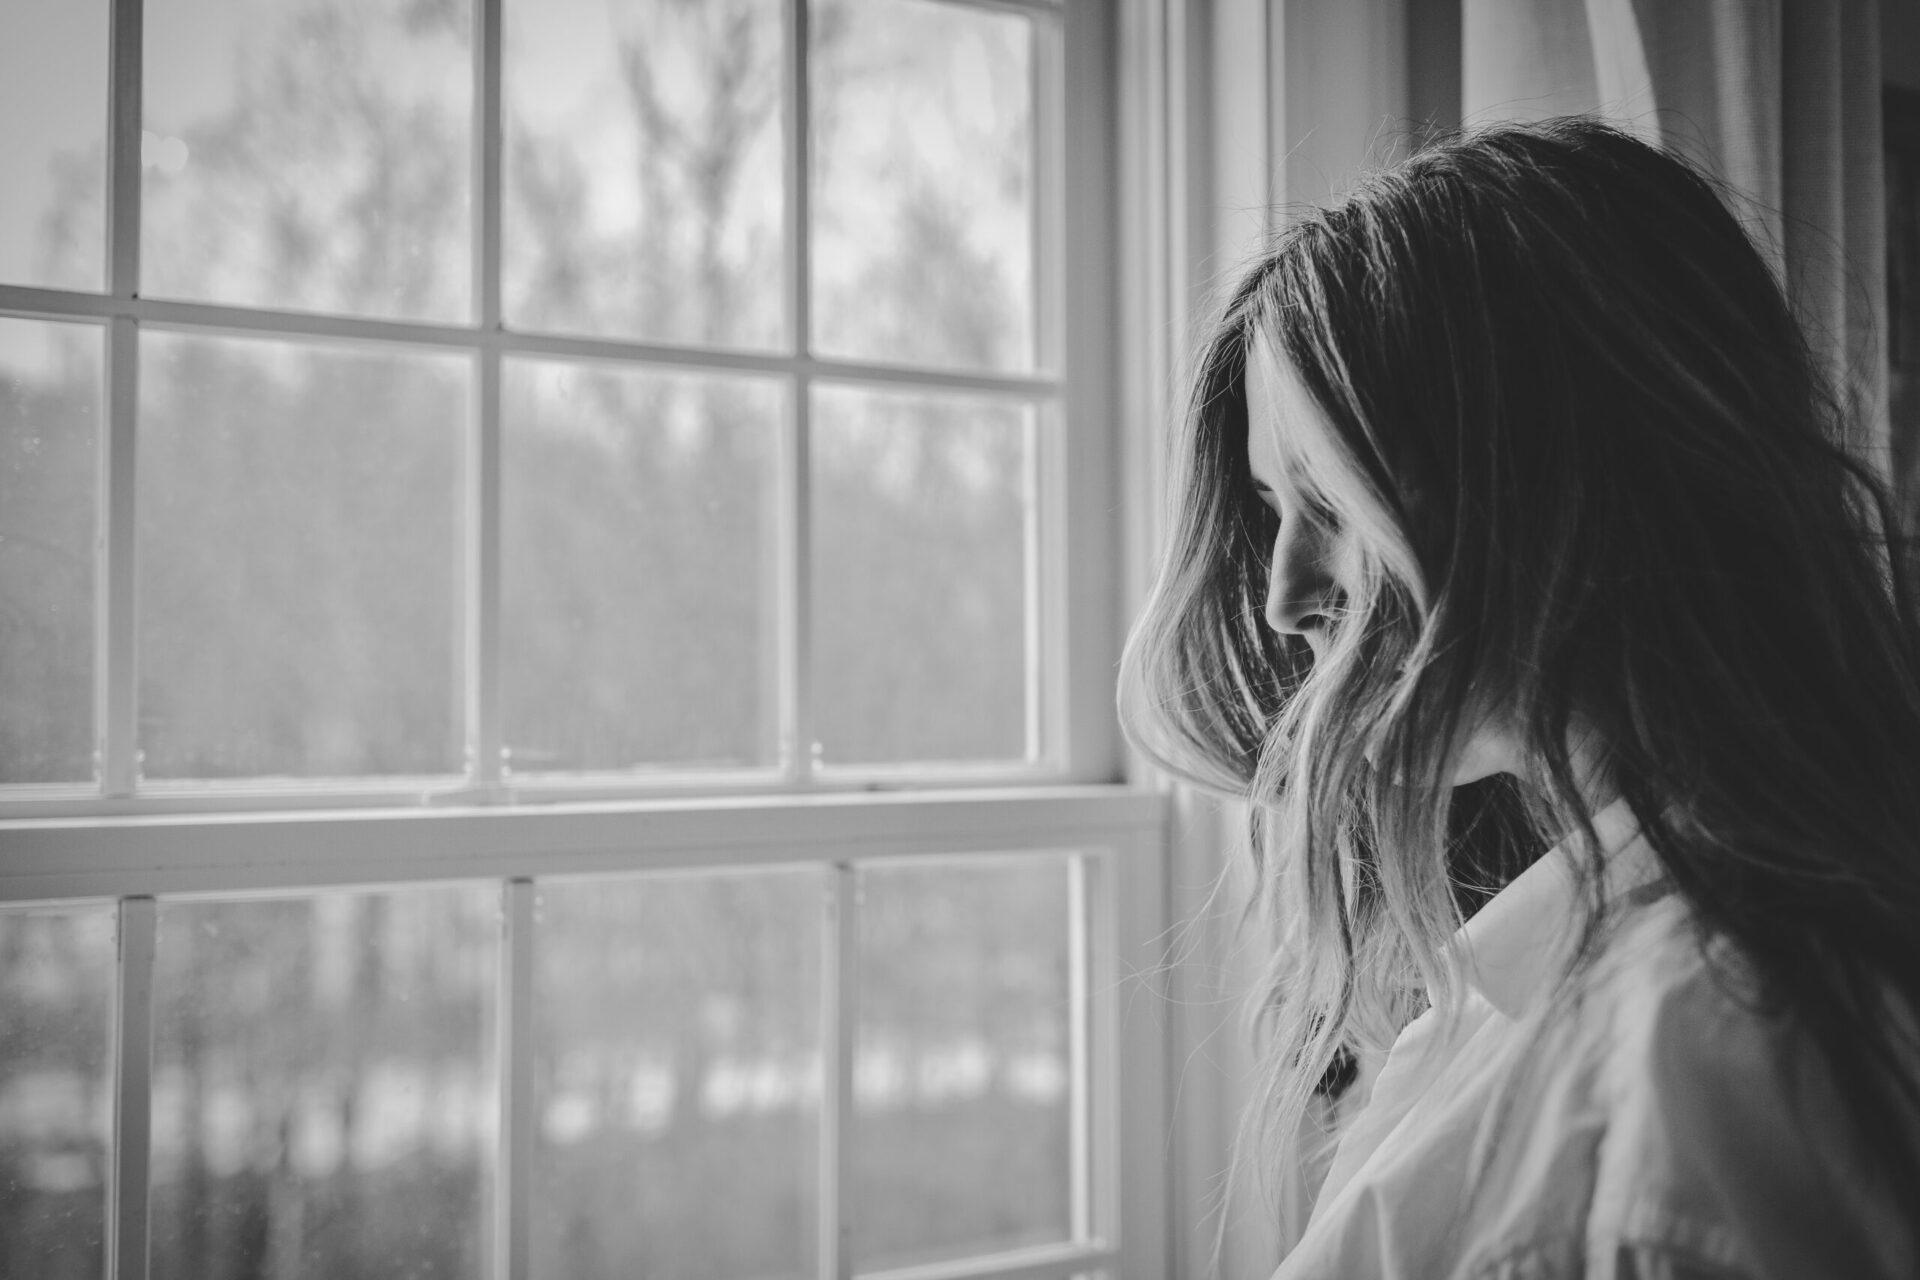 Black and white image of a woman looking out the window.